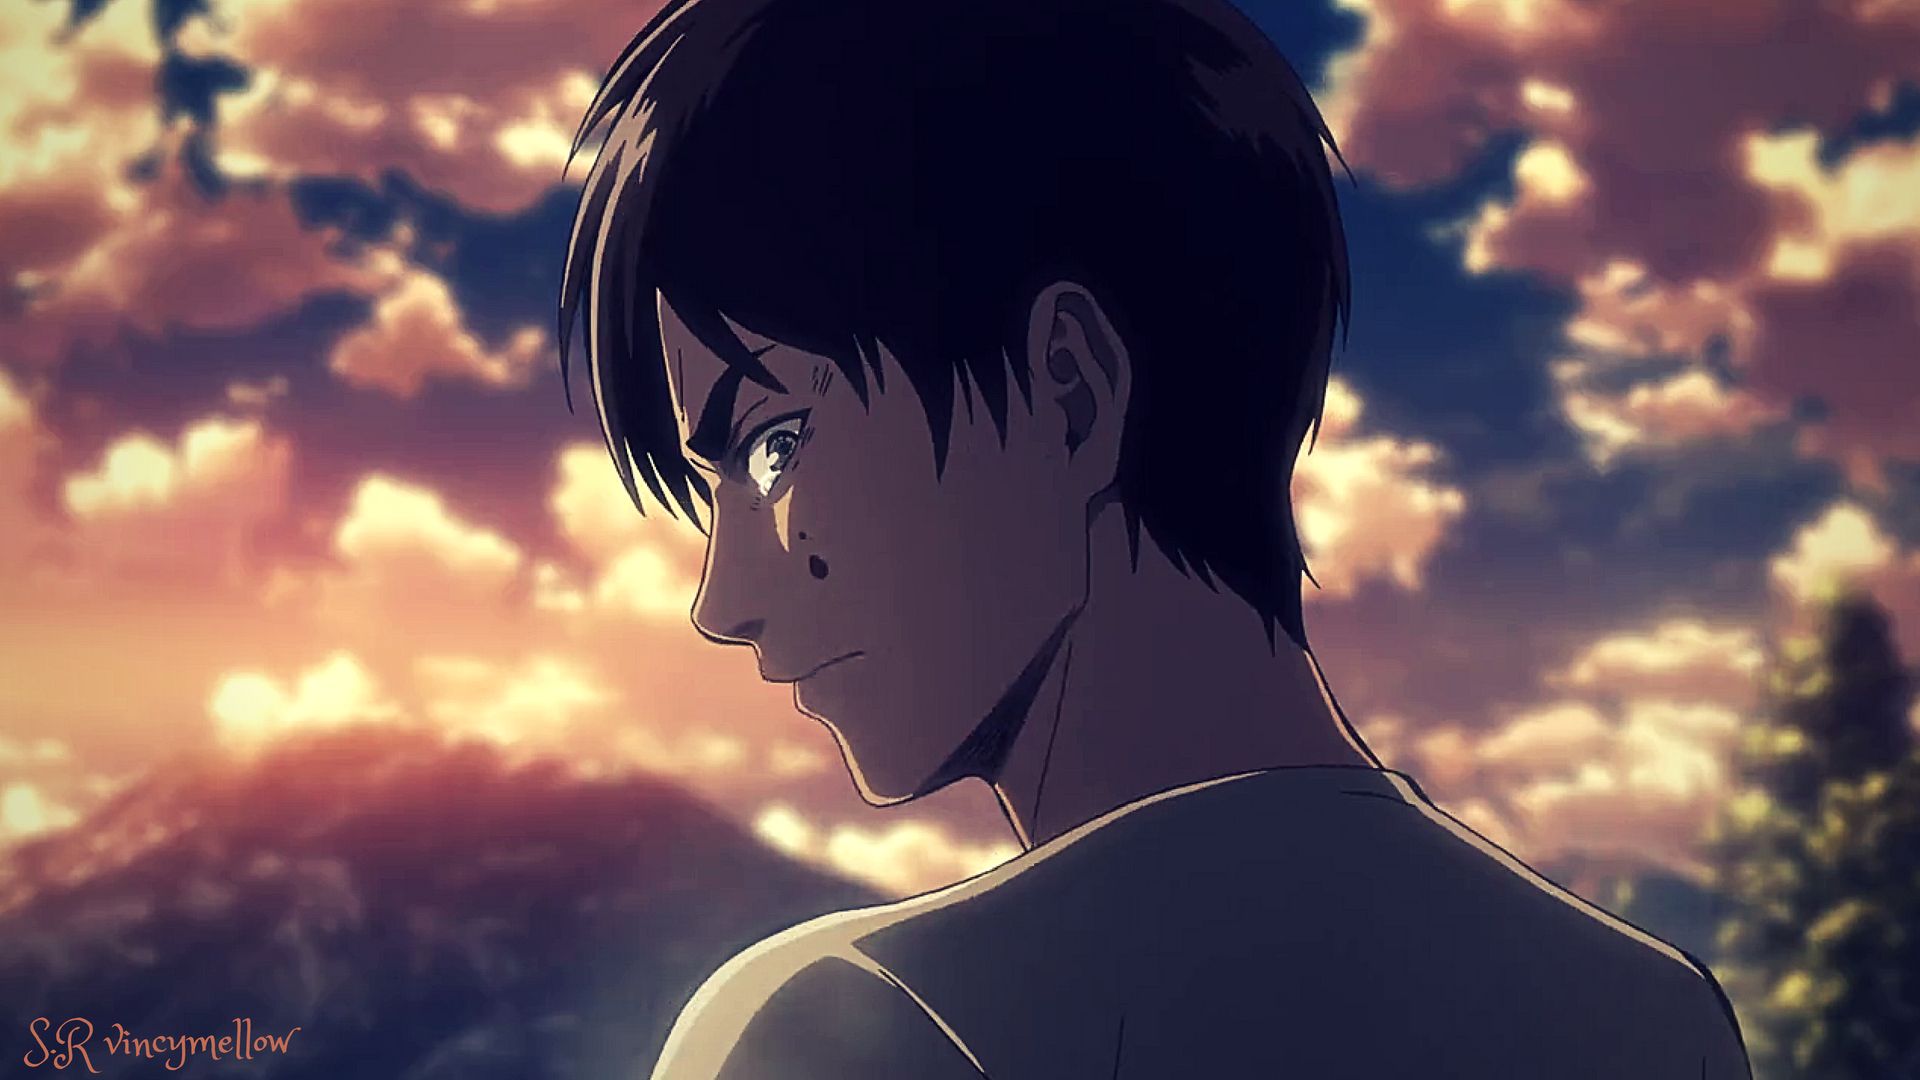 Eren Yeager Angry Crying face.. Attack on Titan.. Anime Desktop Wallpaper. Attack on titan anime, Attack on titan season, Attack on titan season 2